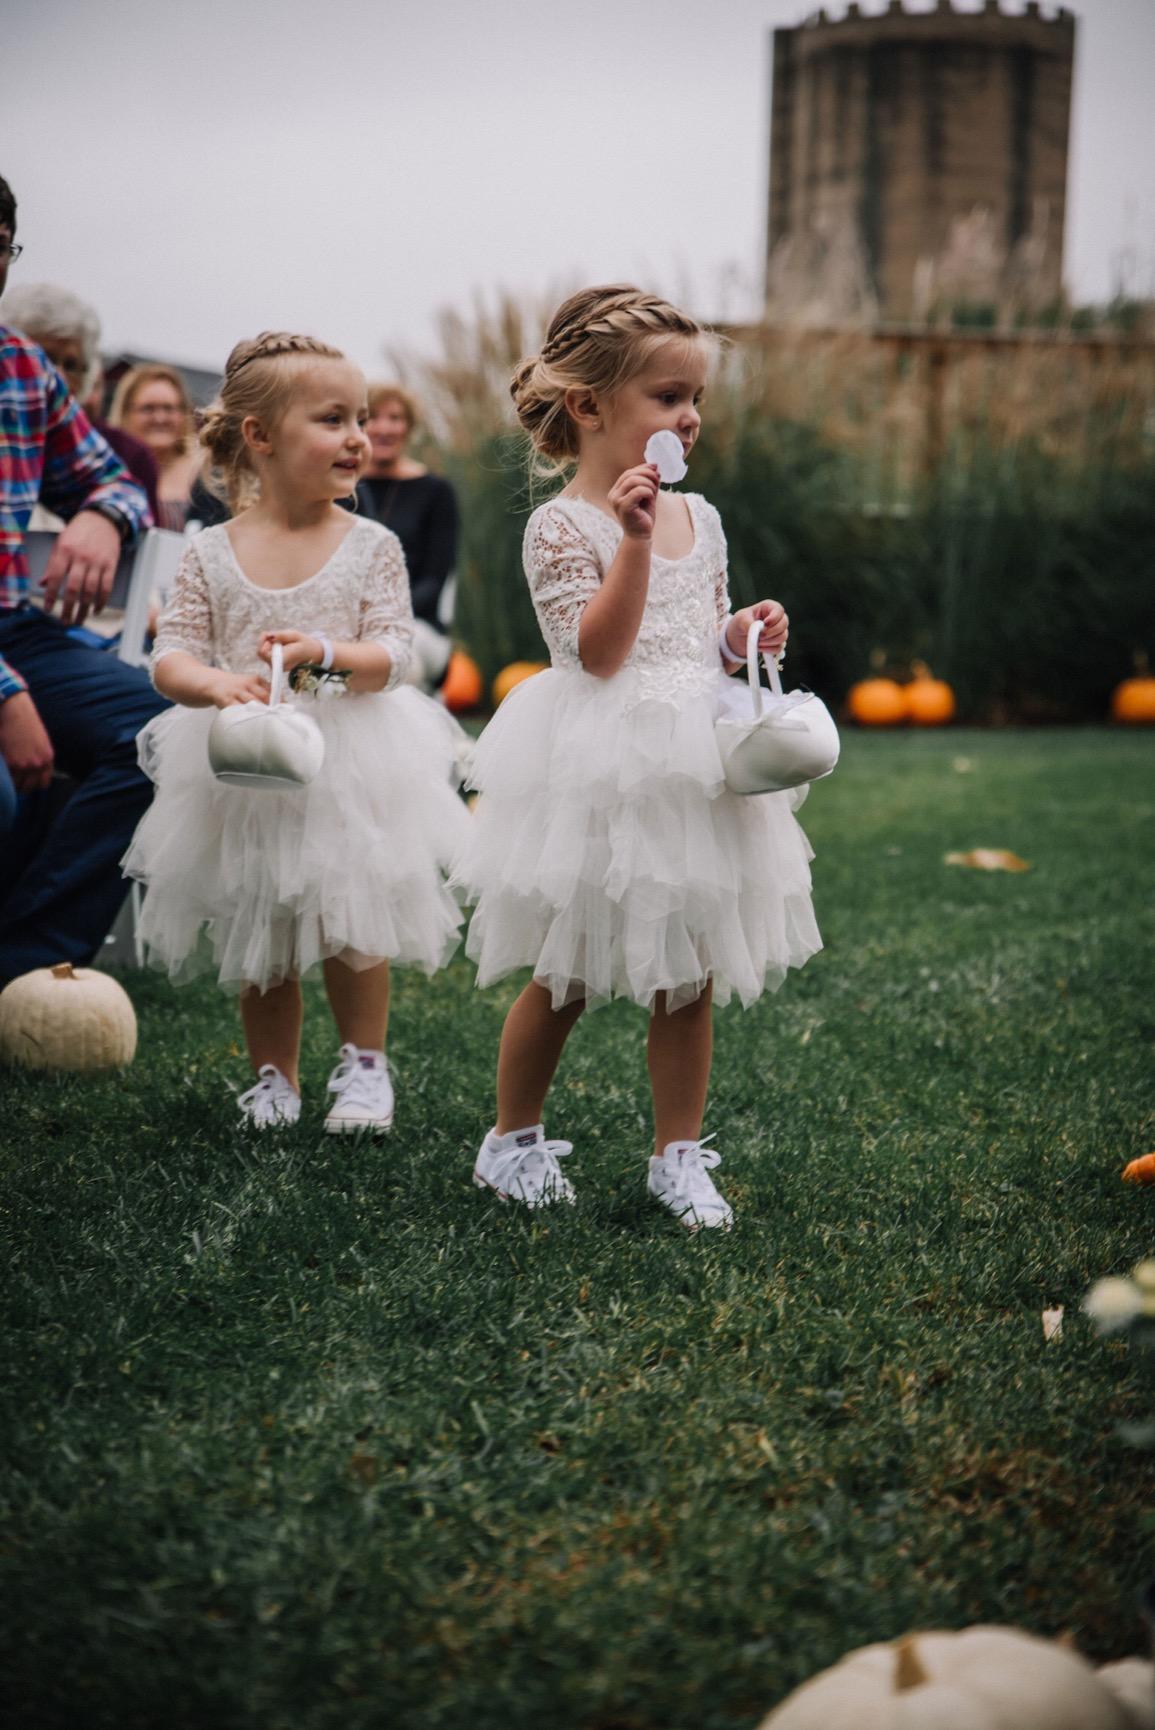 2Bunnies Flower Girl Dress Peony Lace Back A-Line Long Sleeve Tiered Tulle Short (White) - 2BUNNIES